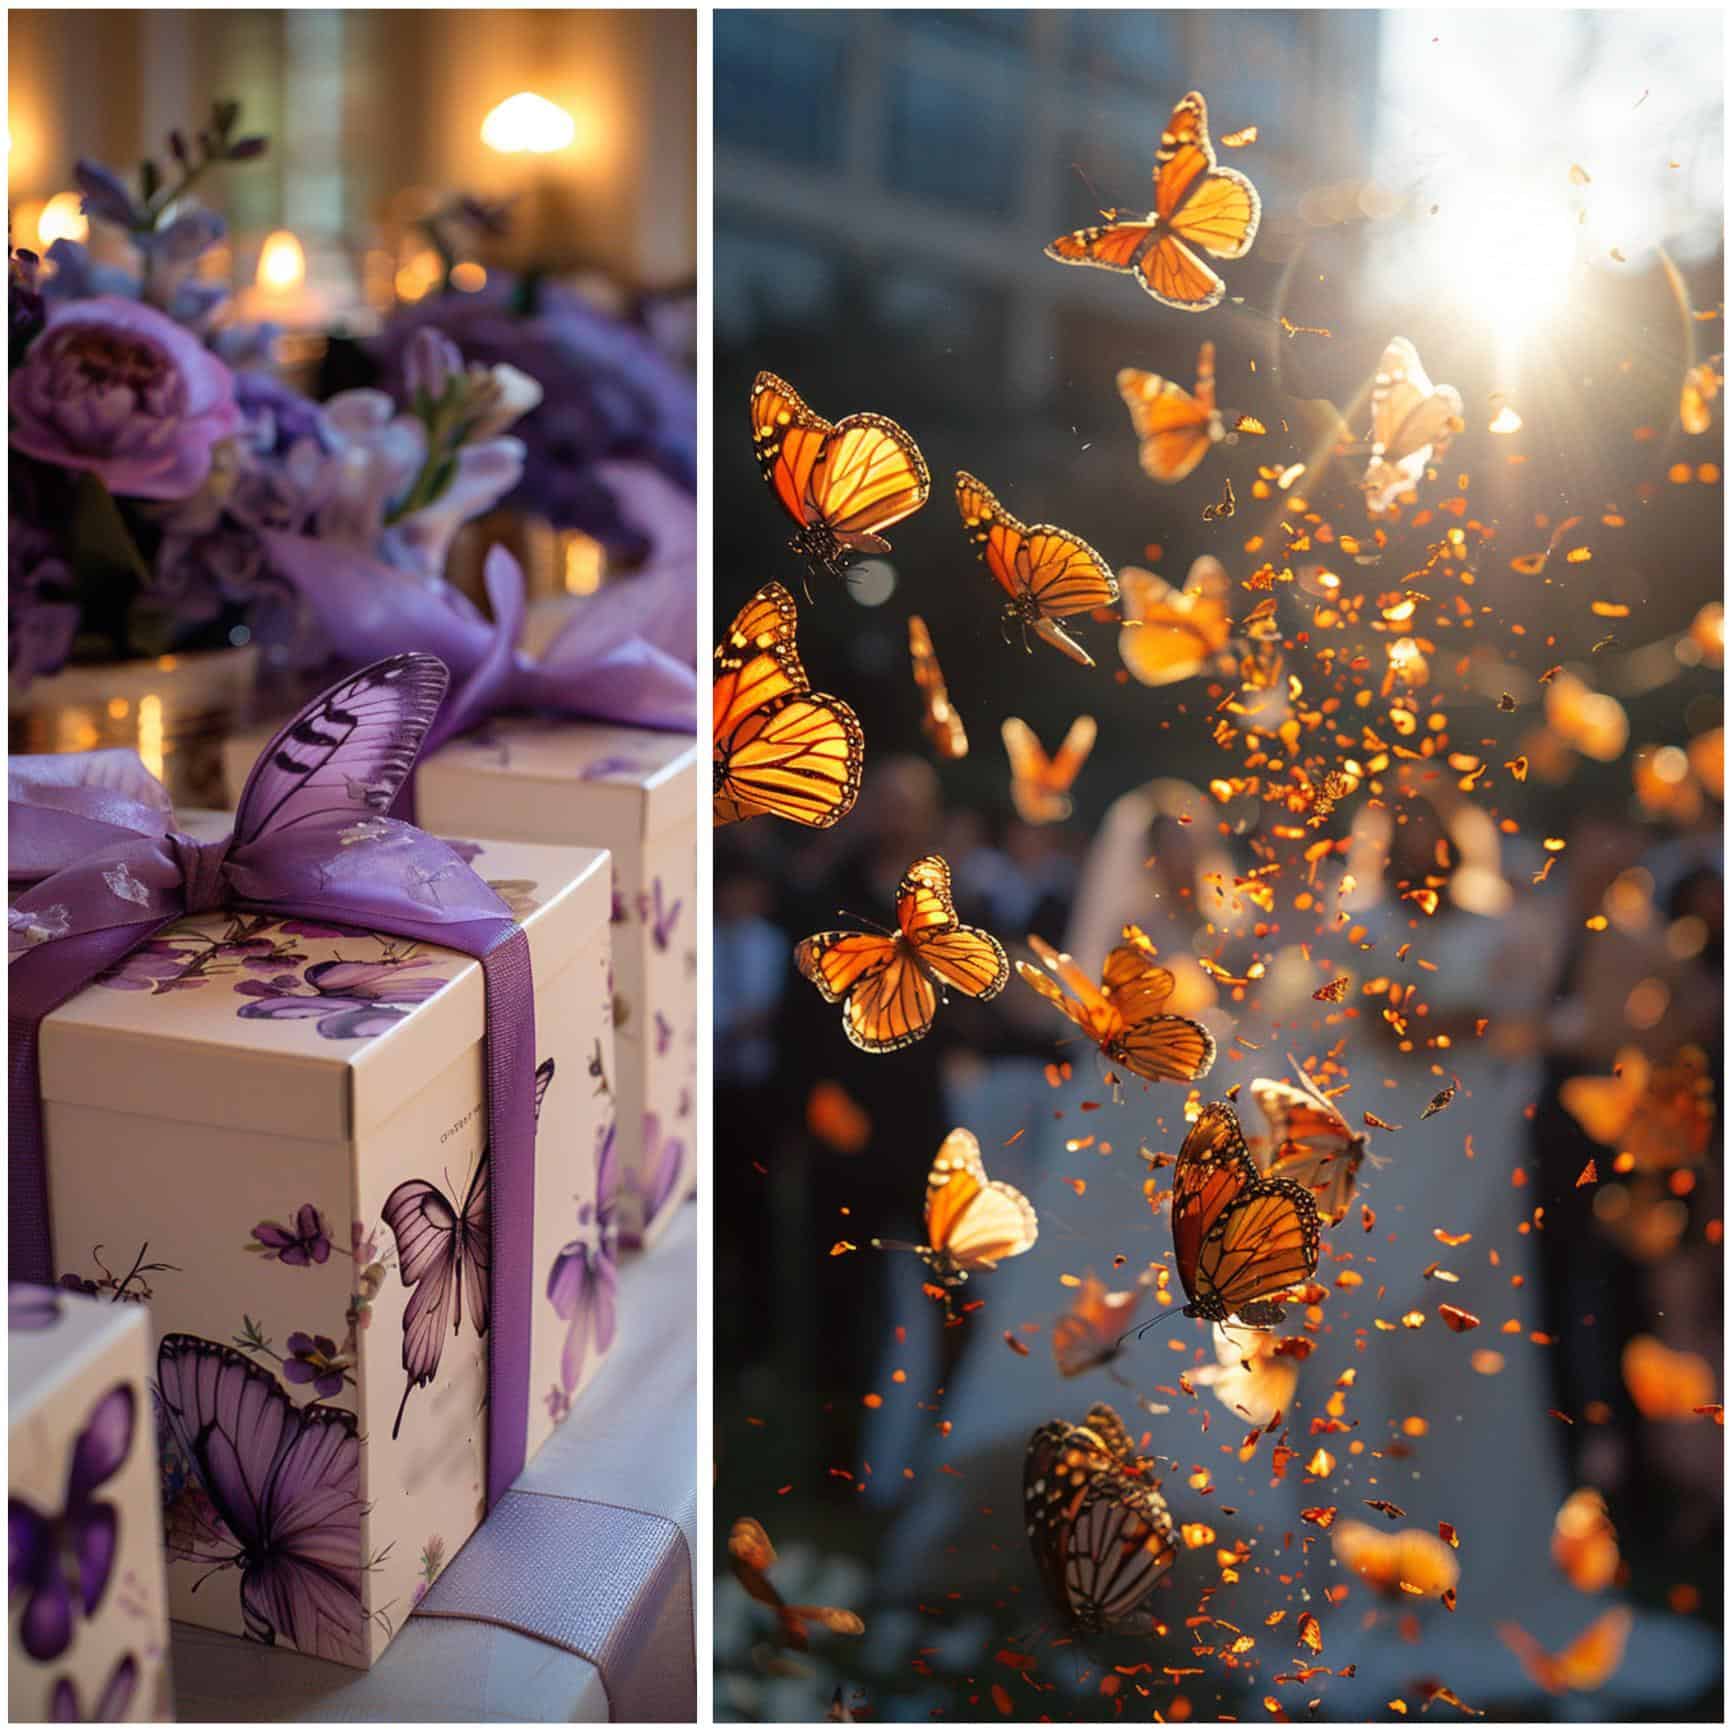 live butterflies at a wedding ceremony